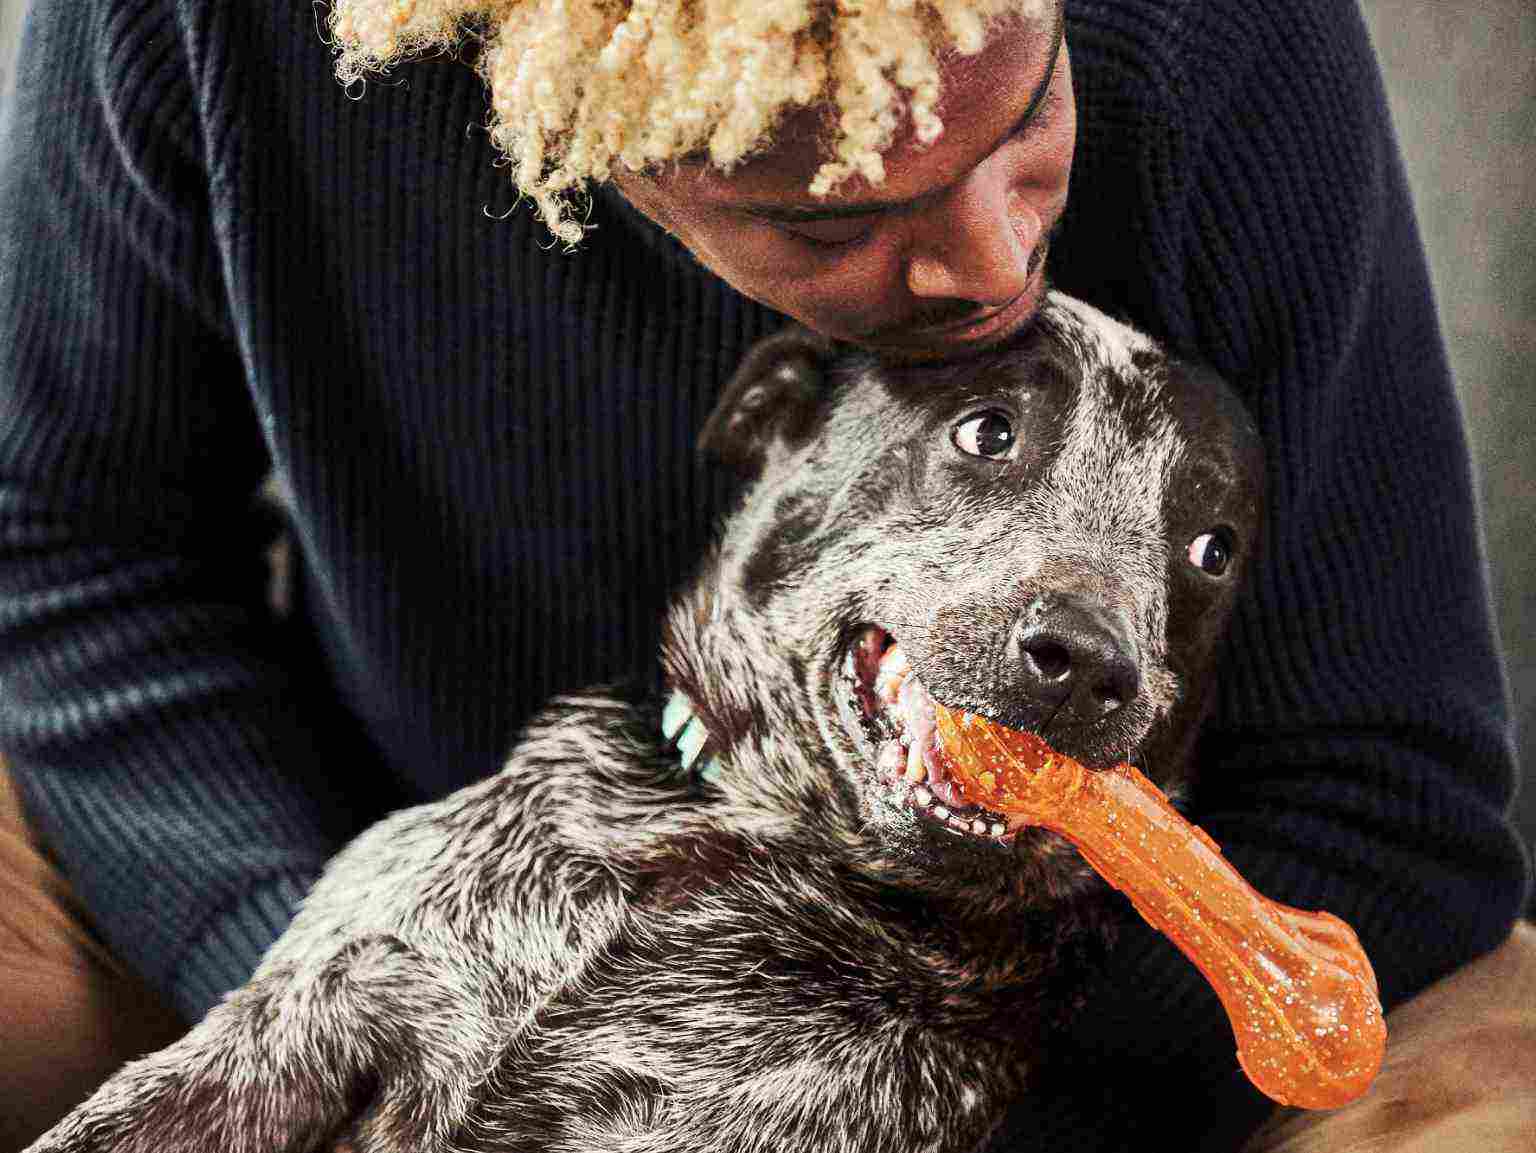 A dog owner kissing his dog, which is holding an orange toy